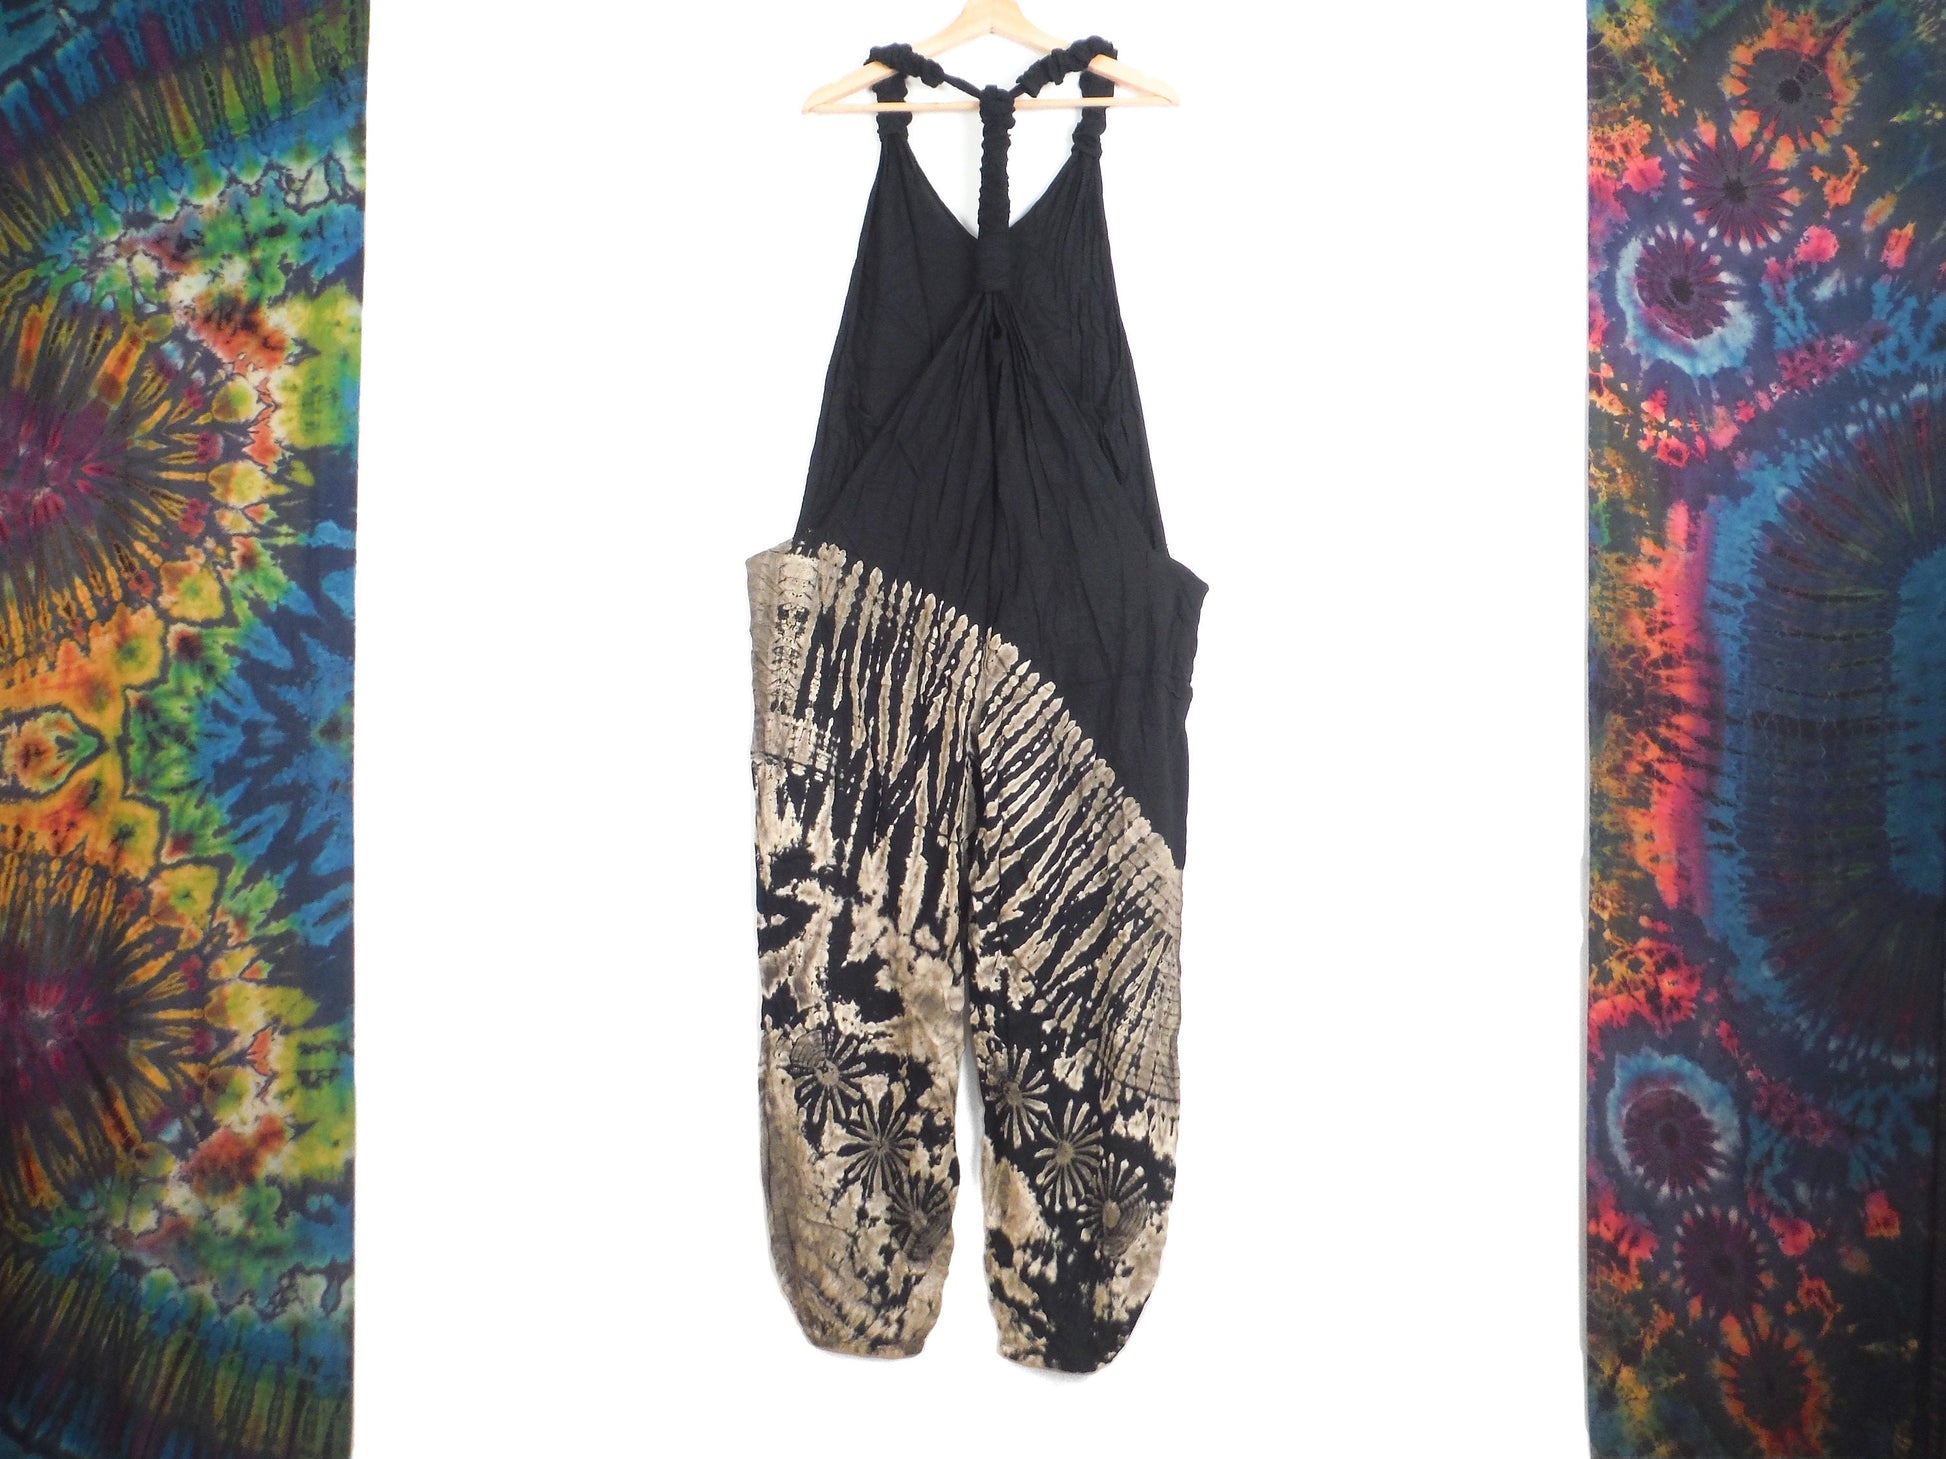 Half Tie-Dye Dungarees - Black and White - Bare Canvas